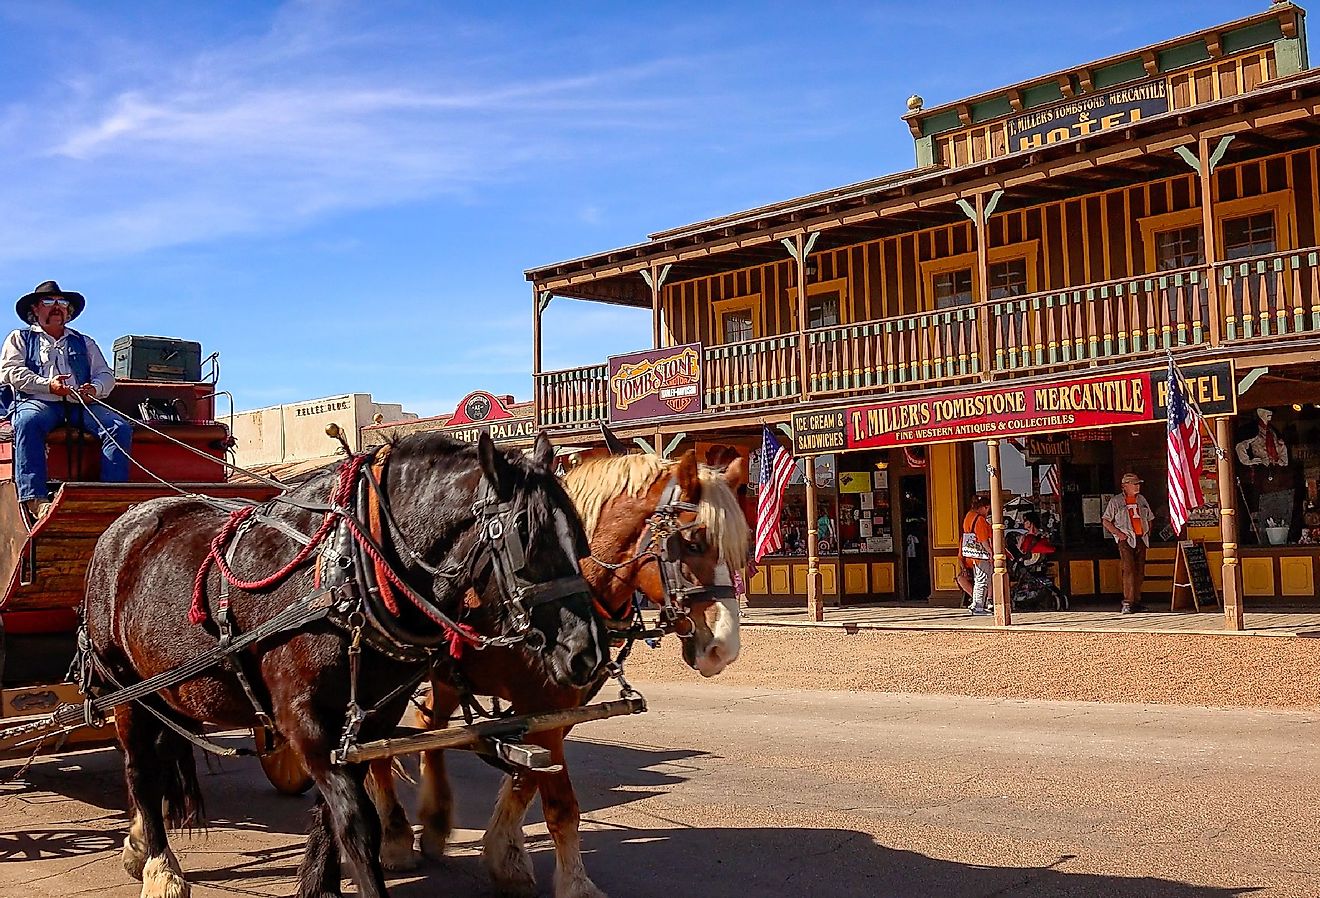 A stagecoach filled with tourists travels the historic streets of Tombstone, Arizona. Image credit CrackerClips Stock Media via Shutterstock